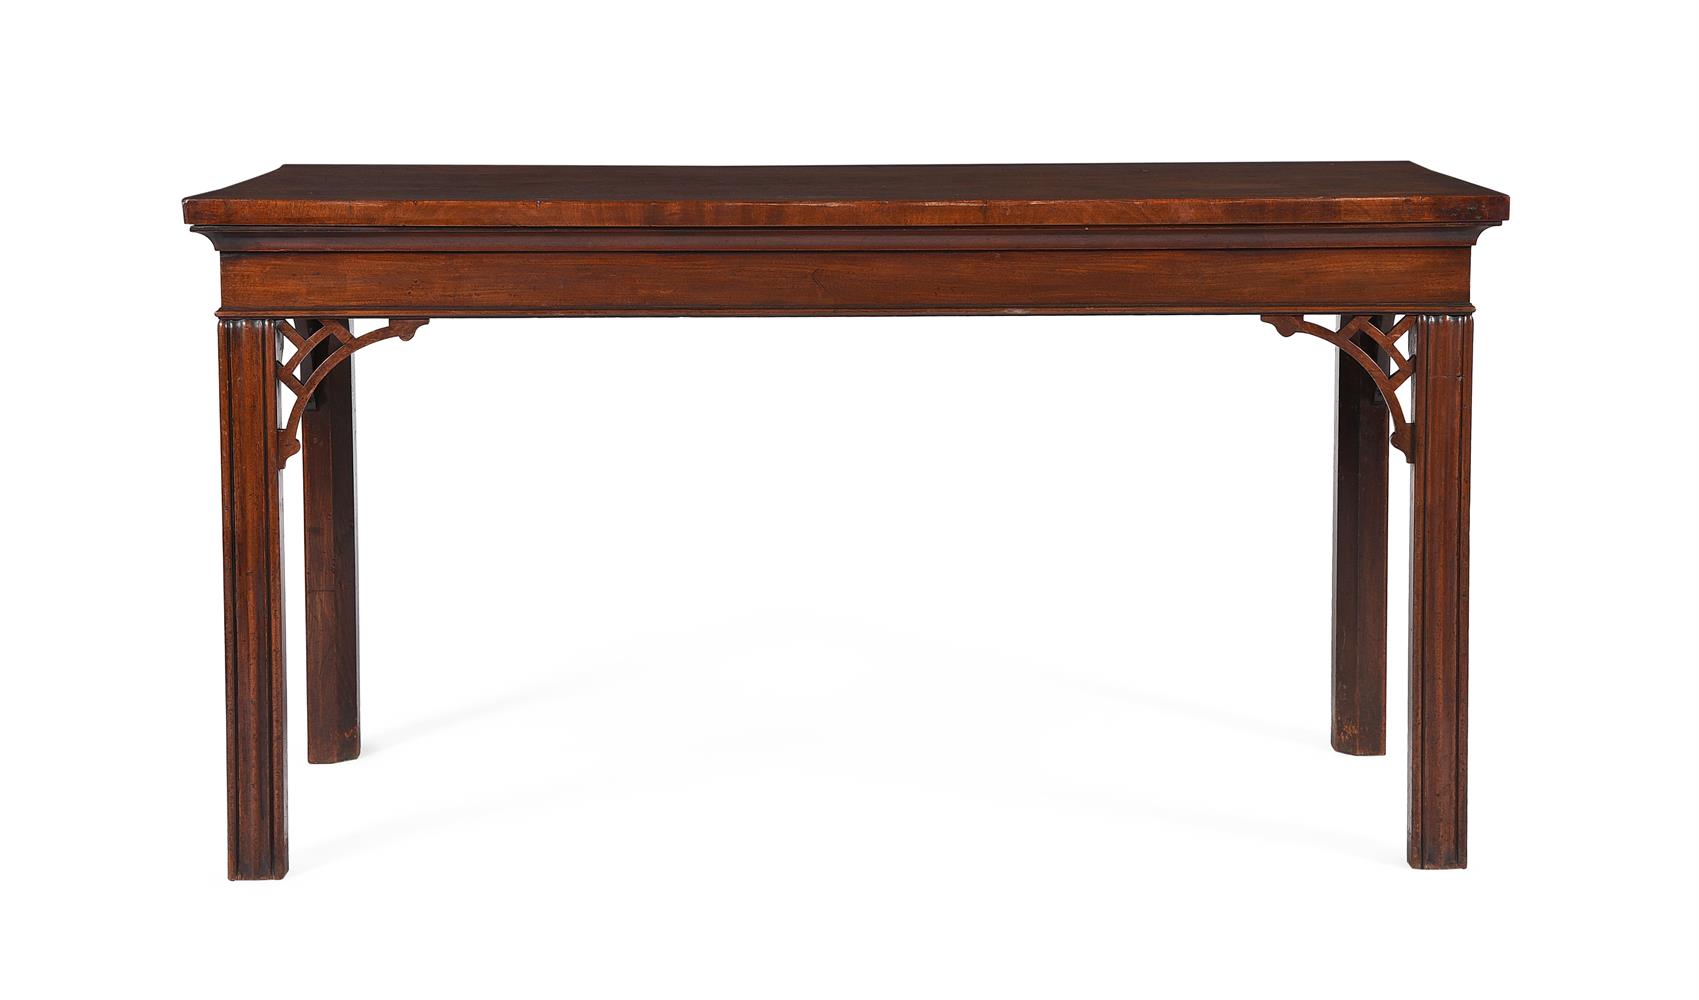 A GEORGE III MAHOGANY HALL TABLE, IN THE MANNER OF THOMAS CHIPPENDALE, CIRCA 1780